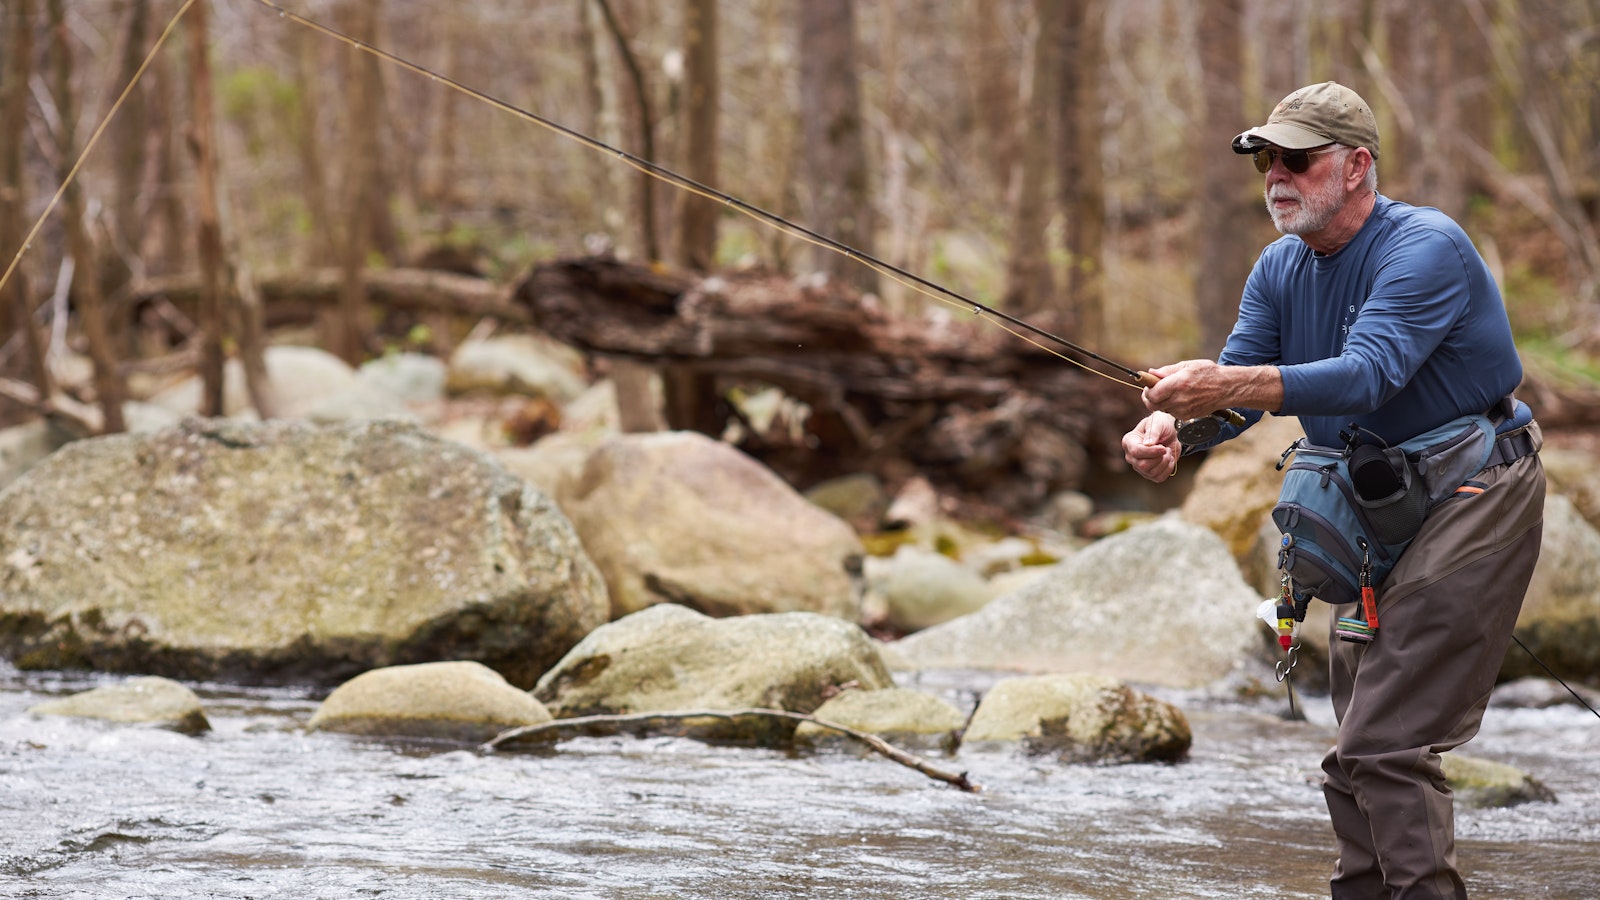 A person goes fly fishing in a stream that reaches up to his knees